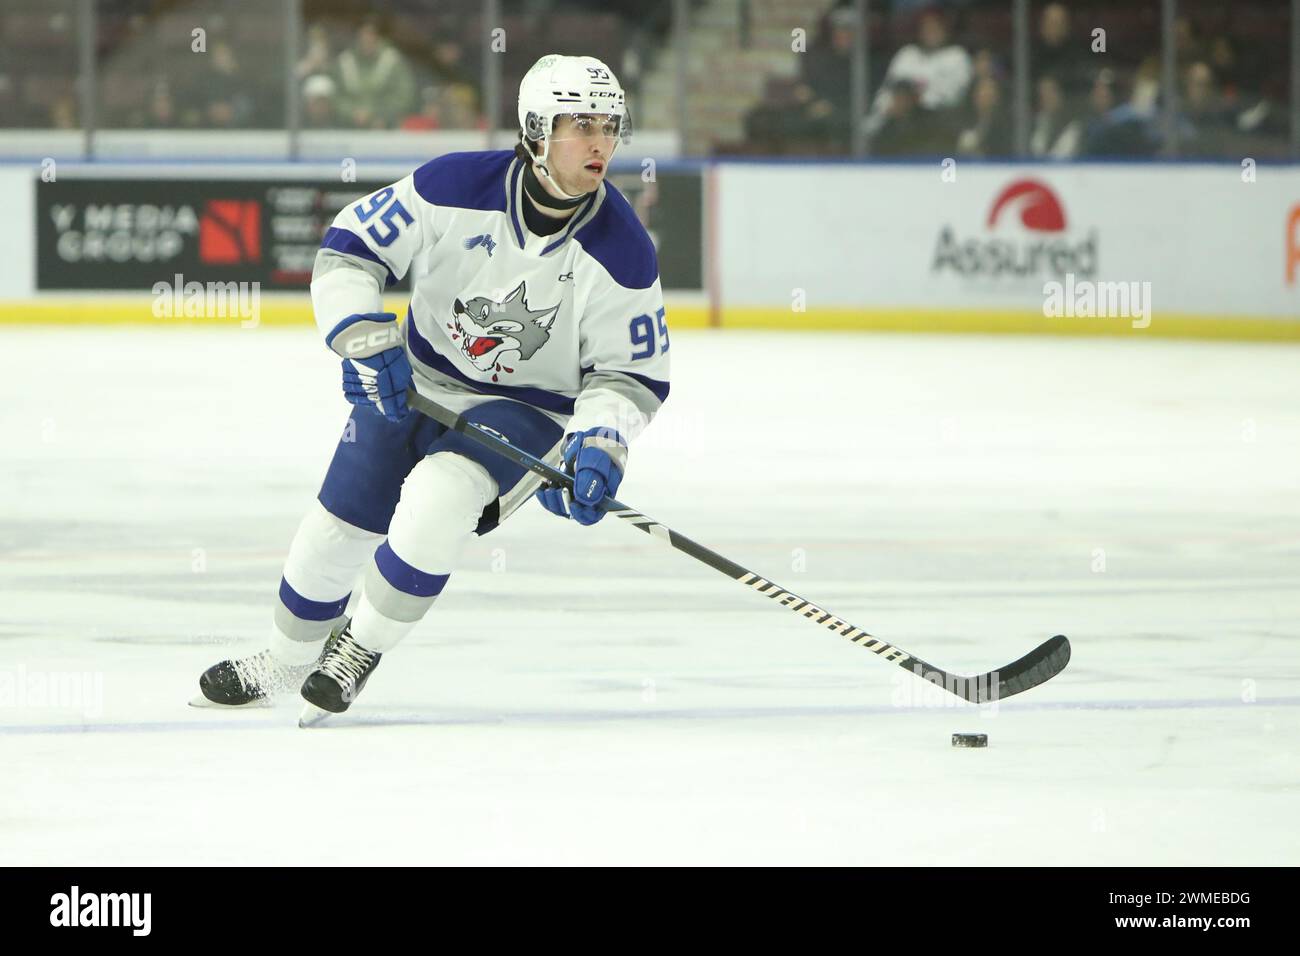 Mississauga, Canada. 25th Feb, 2024. Feb 25 2024, Mississauga Ontario Canada, The Mississauga Steelheads Beat the Sudbury Wolves 4-3 in regulation.(Editorial Only) Nick DeAngelis(95) of the Sudbury Wolves. Credit: Luke Durda/Alamy Live News Stock Photo